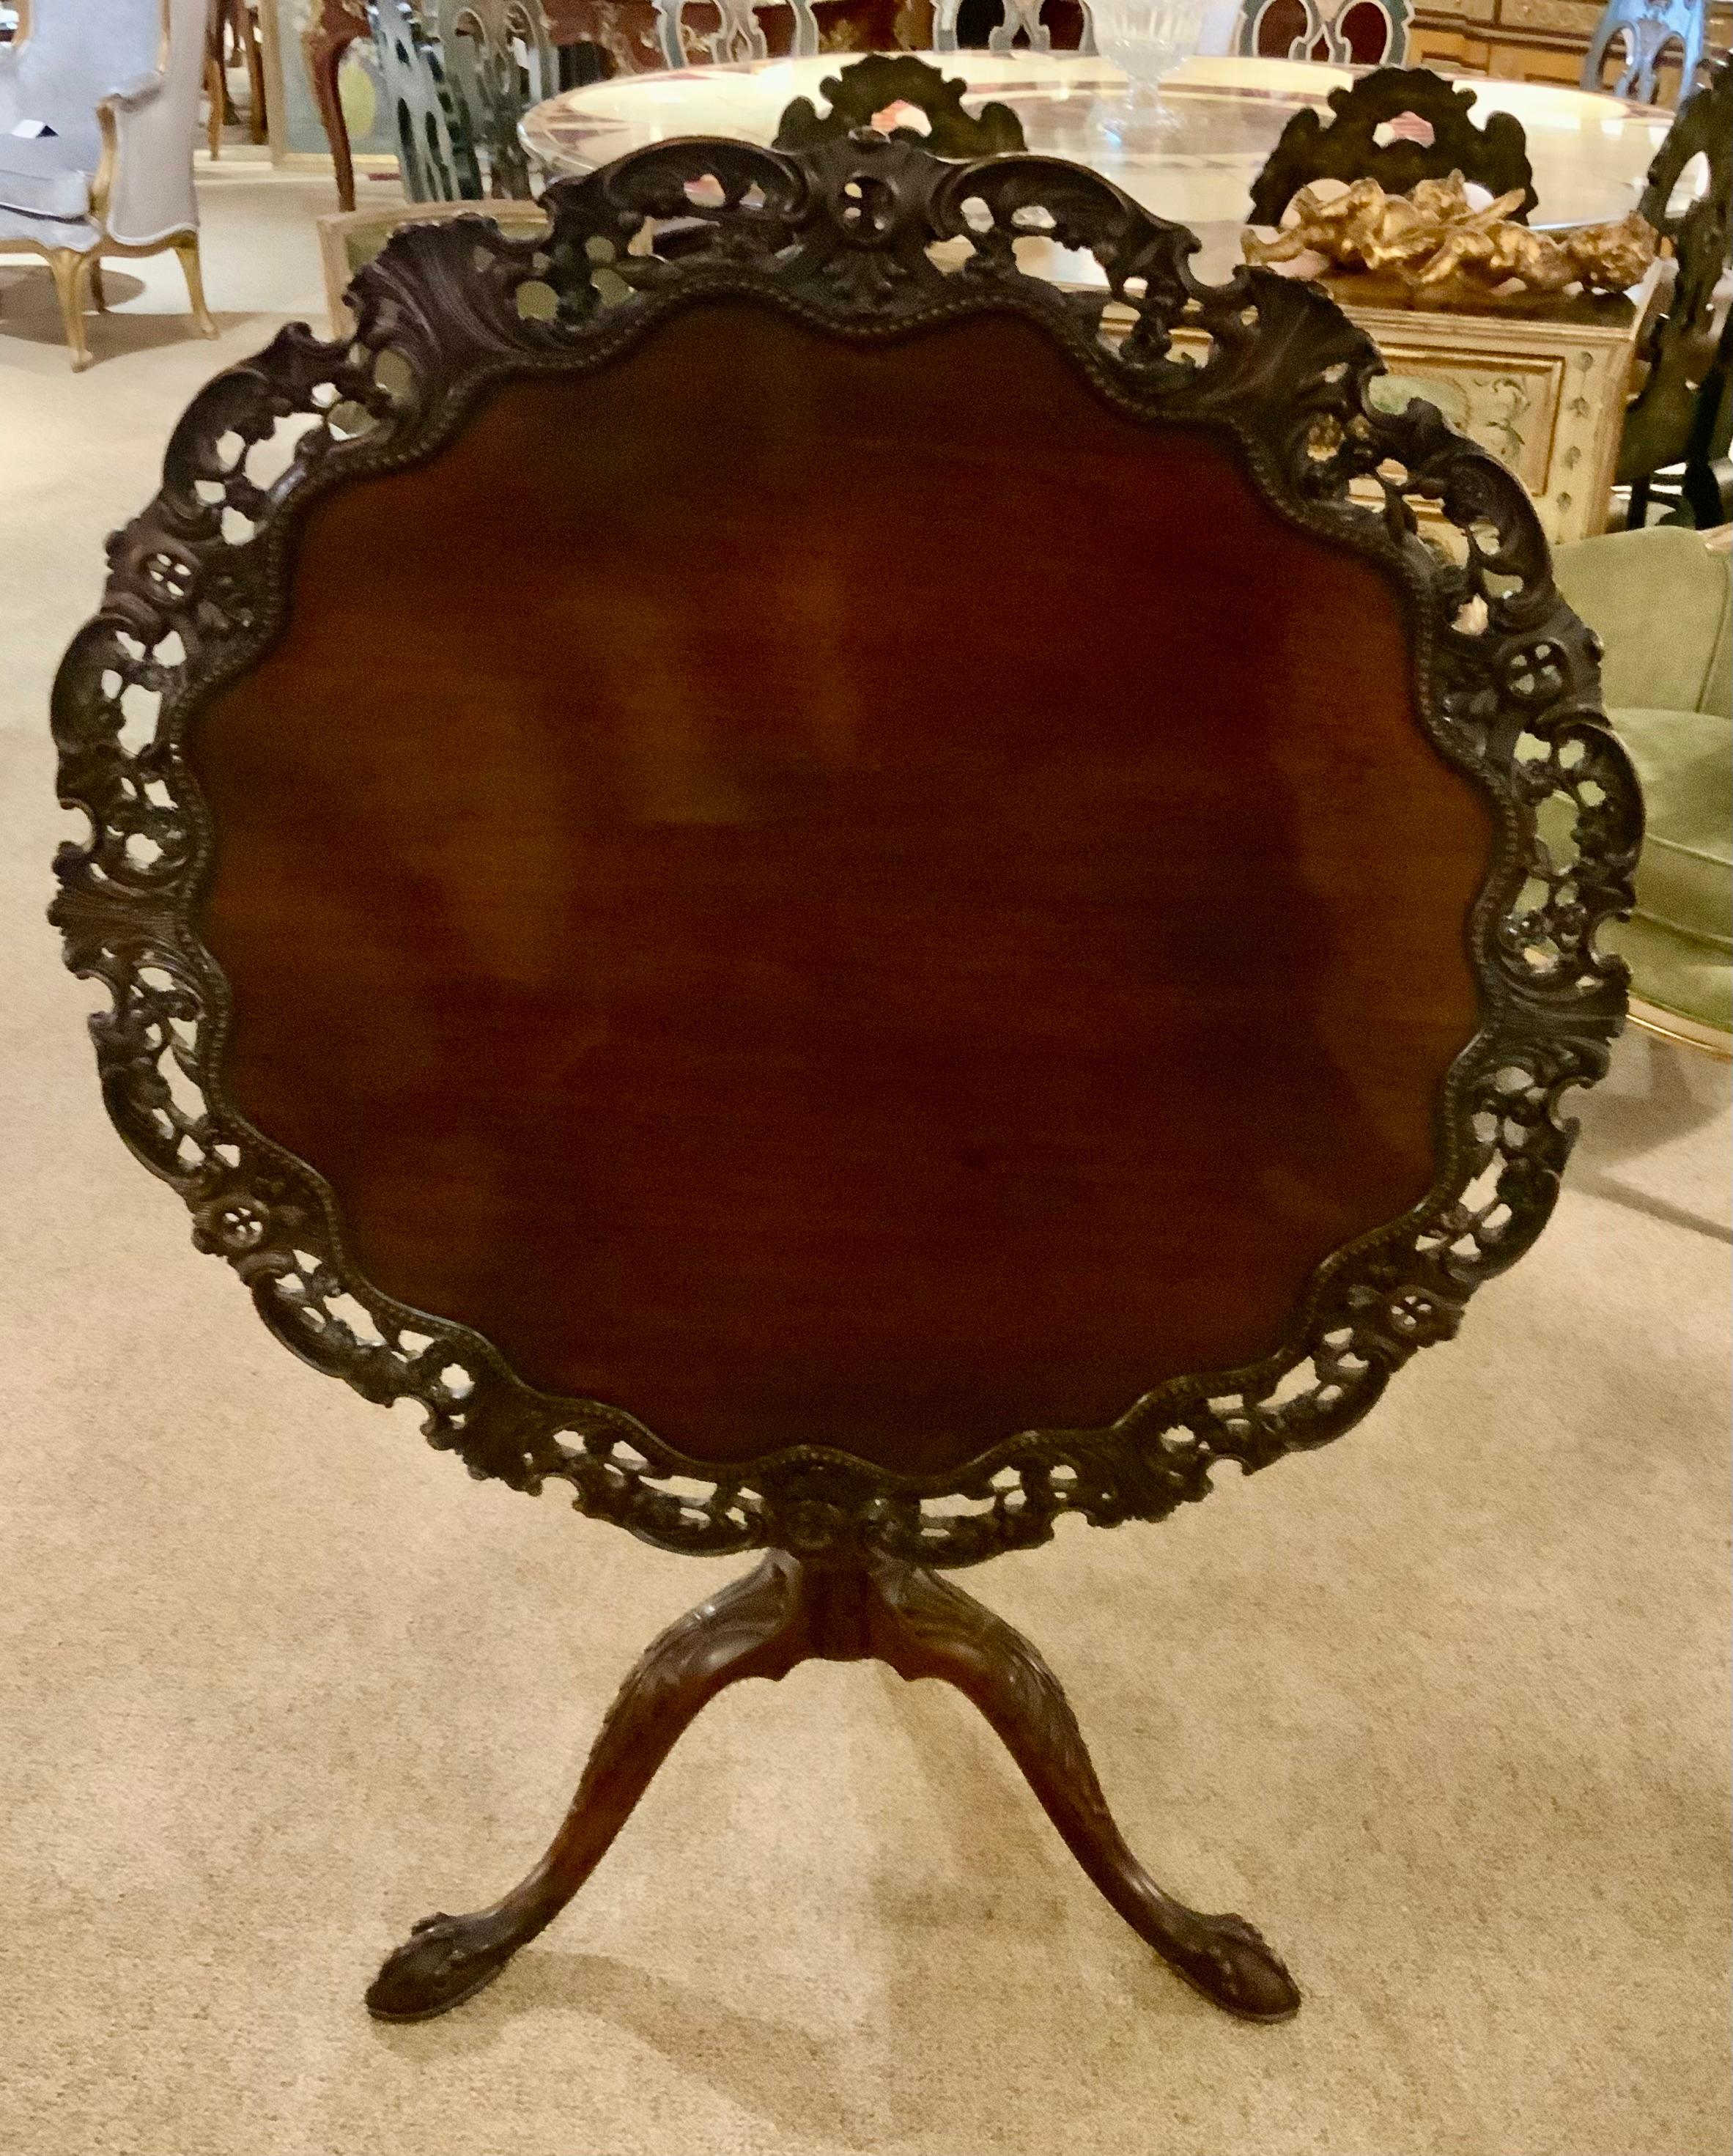 The exceptional carving and quality wood used in this piece
Make it special. It has a tilt top movement that works easily
The top has been French polished and is without
Scratches. The carved edge was done by a master
Craftsman.